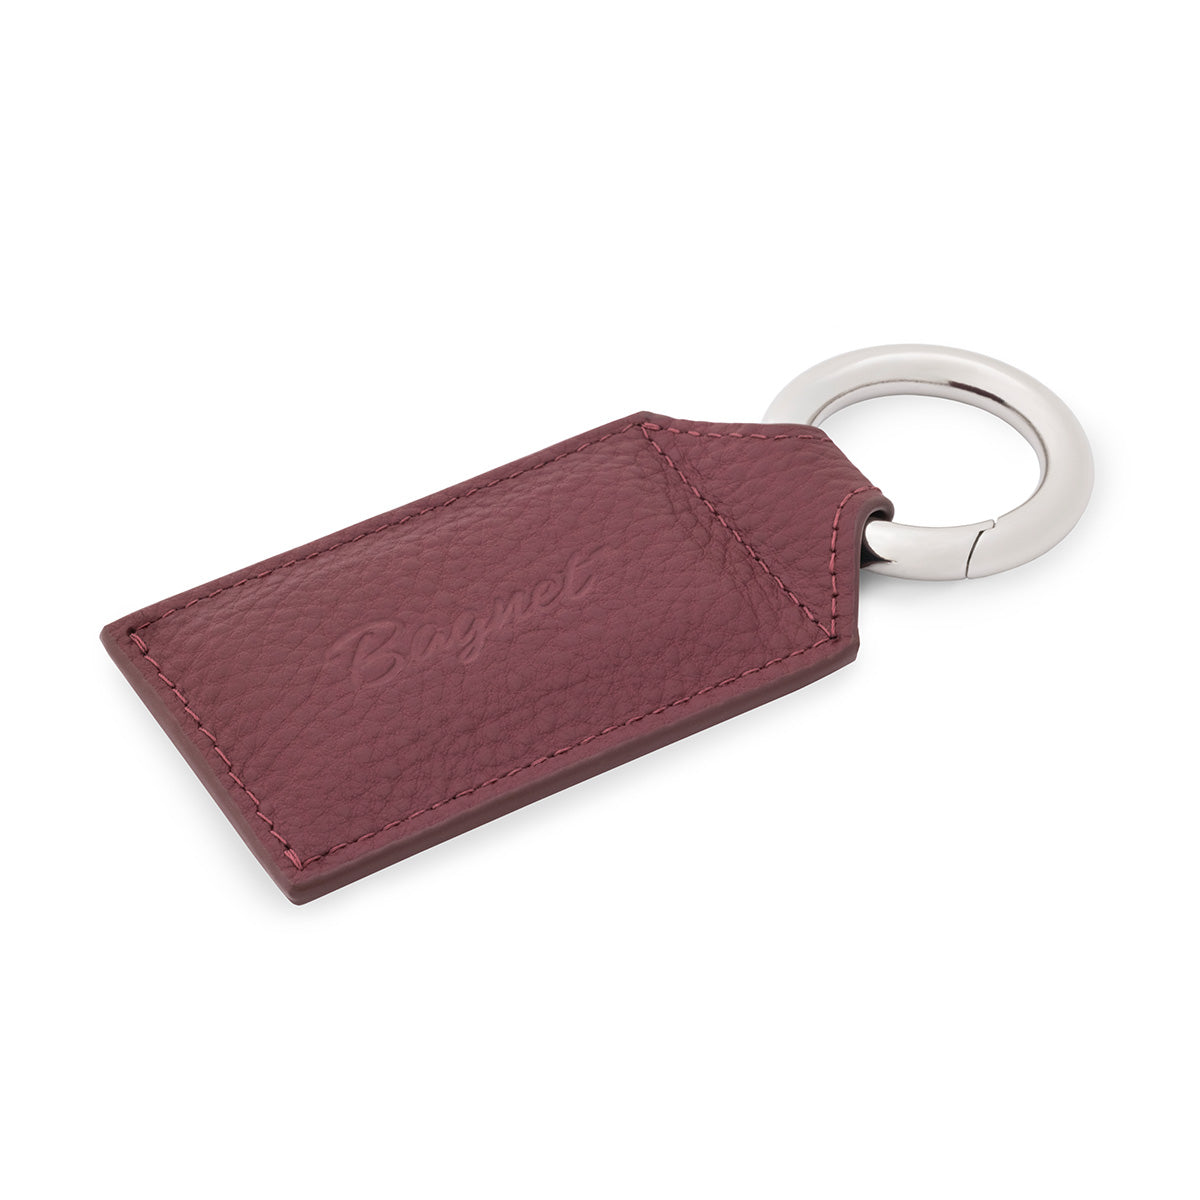 Merlot Leather Bagnet with Small Polished Nickel Ring